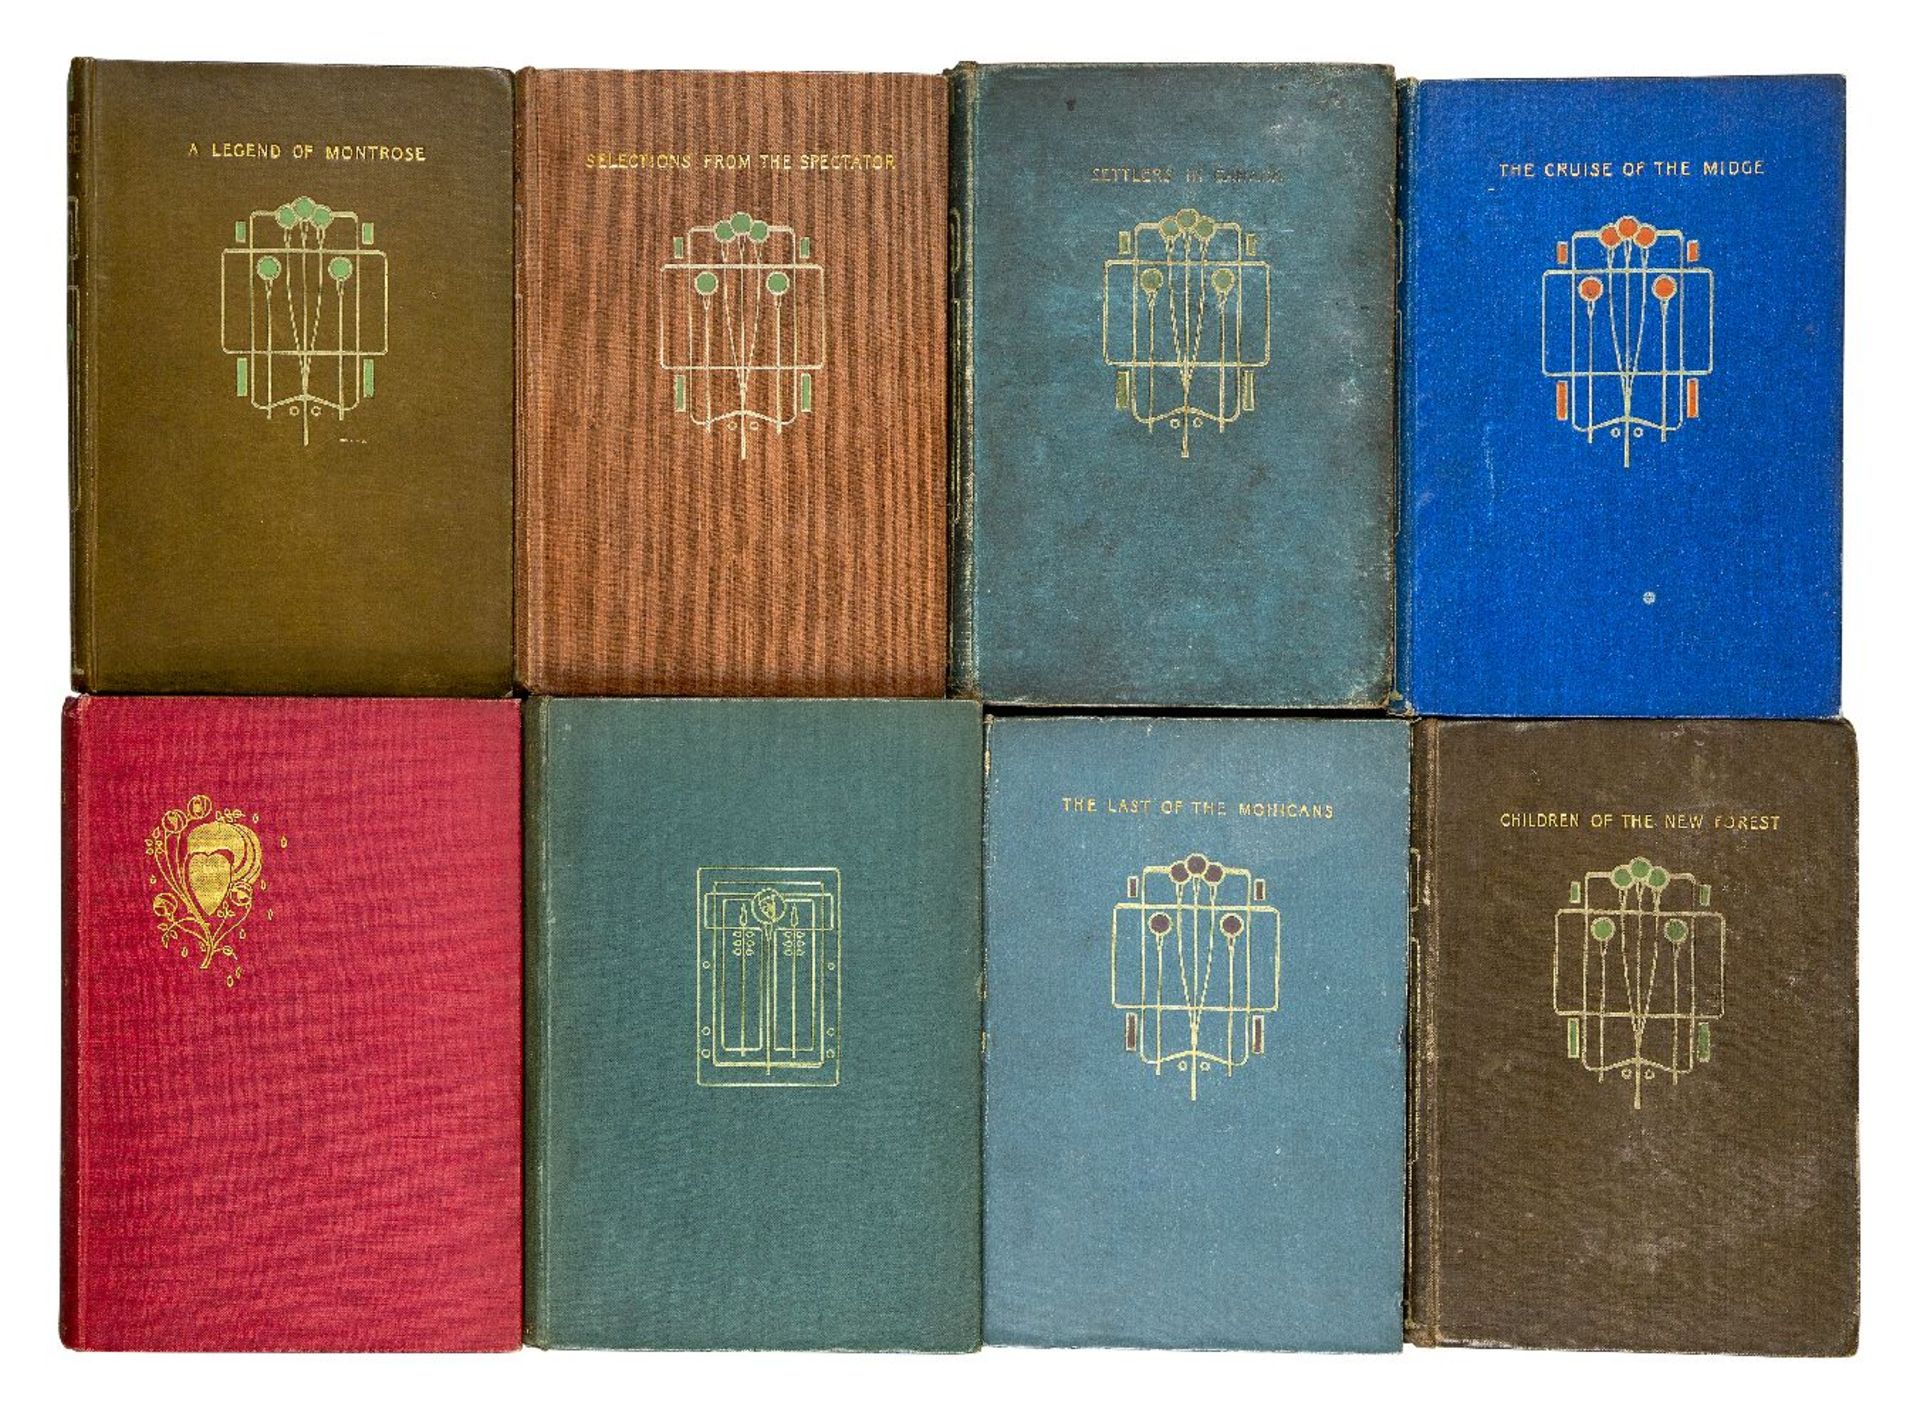 Blackie and Son Ltd, a quantity of books with decorative covers, some in the ‘Glasgow school’ - Image 4 of 8